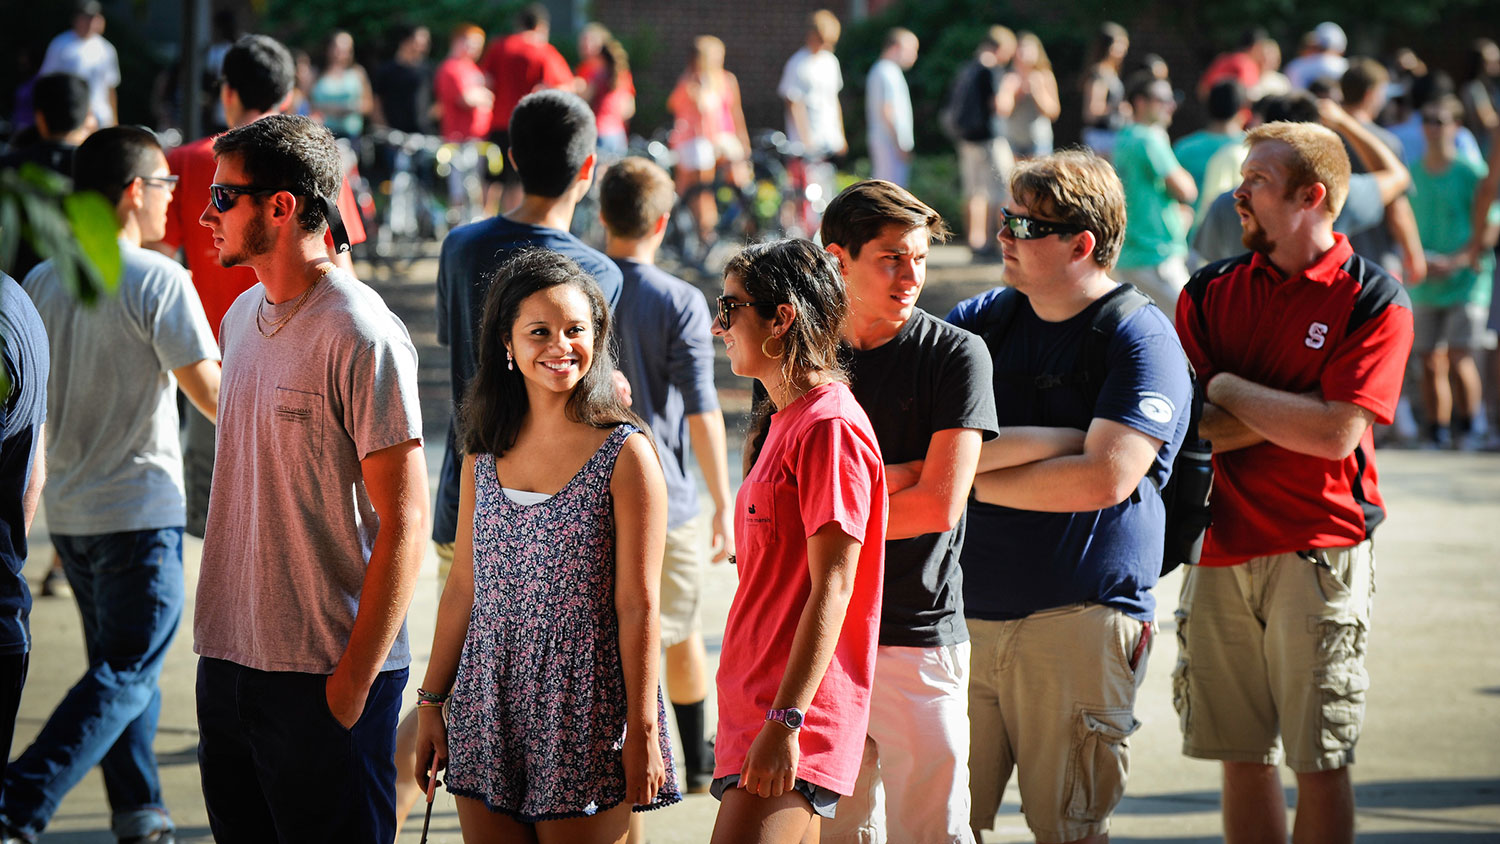 Students waiting in line